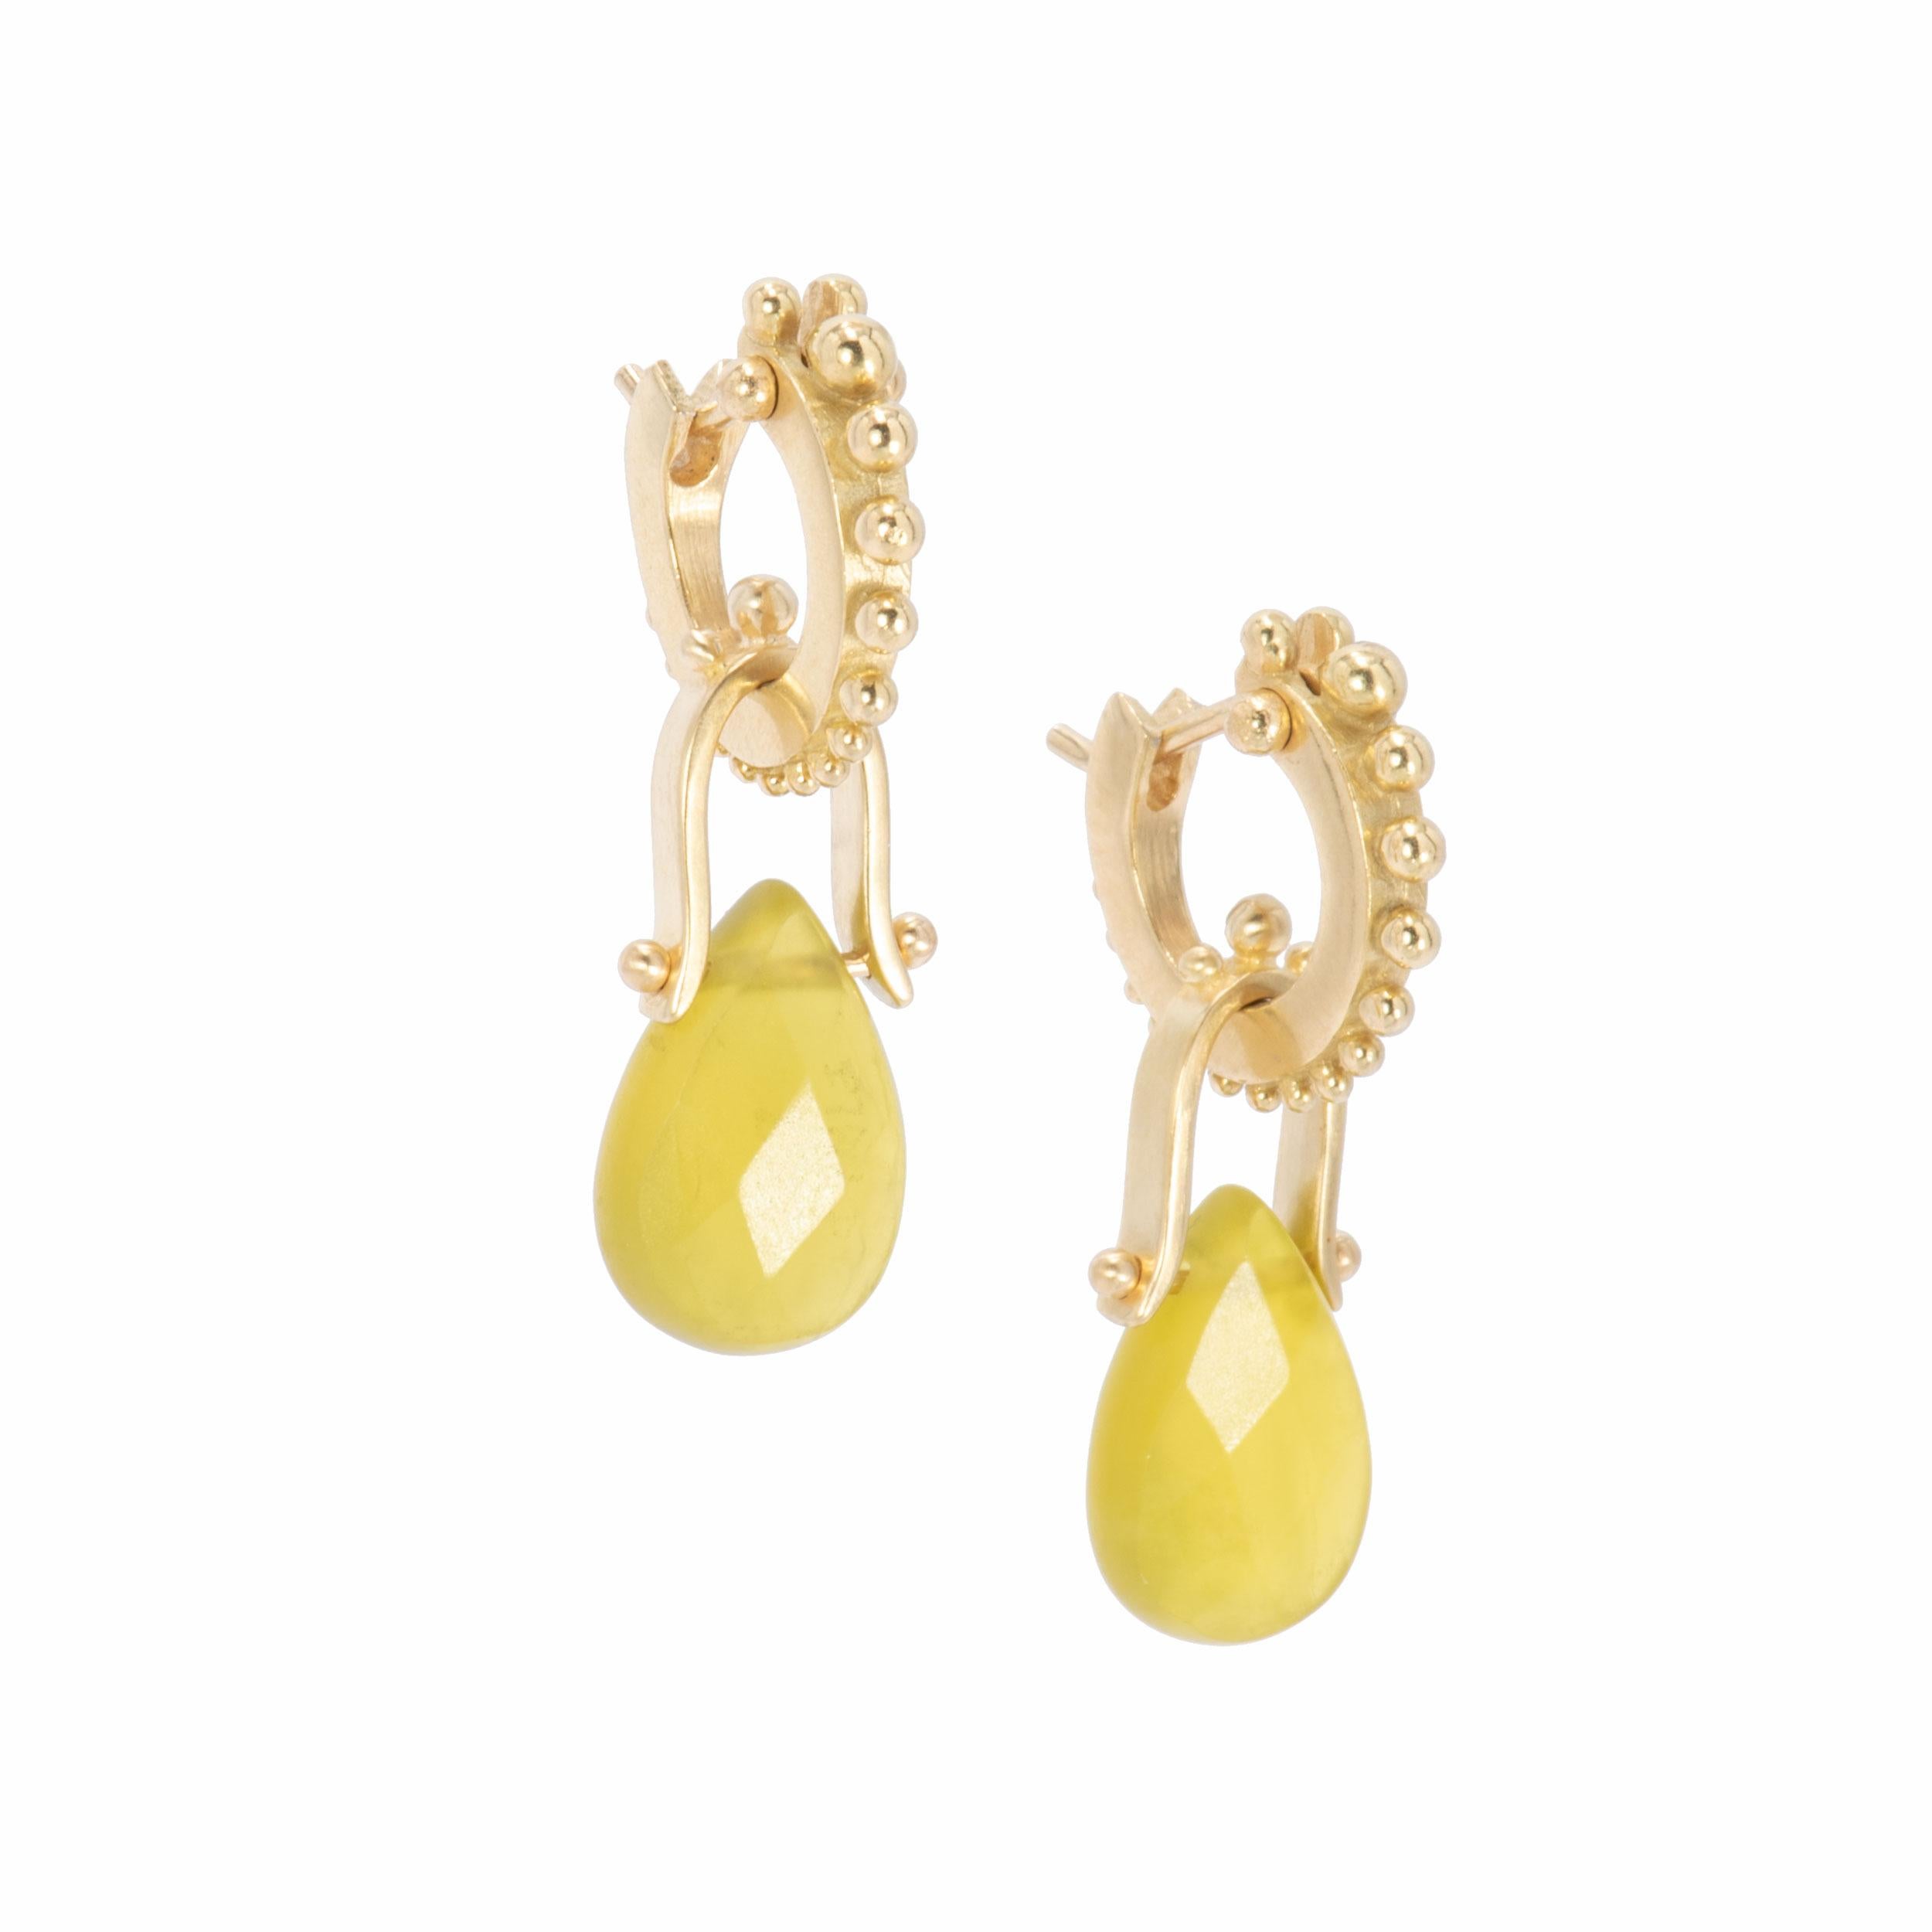 Deep chartreuse and grapefruit highlights make Serpentine Teardrop Oblio Drop Earrings look like candy. Hung from our Oblio hinged findings, serpentine teardrop oblio earrings are suspended on our 18k gold narrow beaded hoops which click tightly